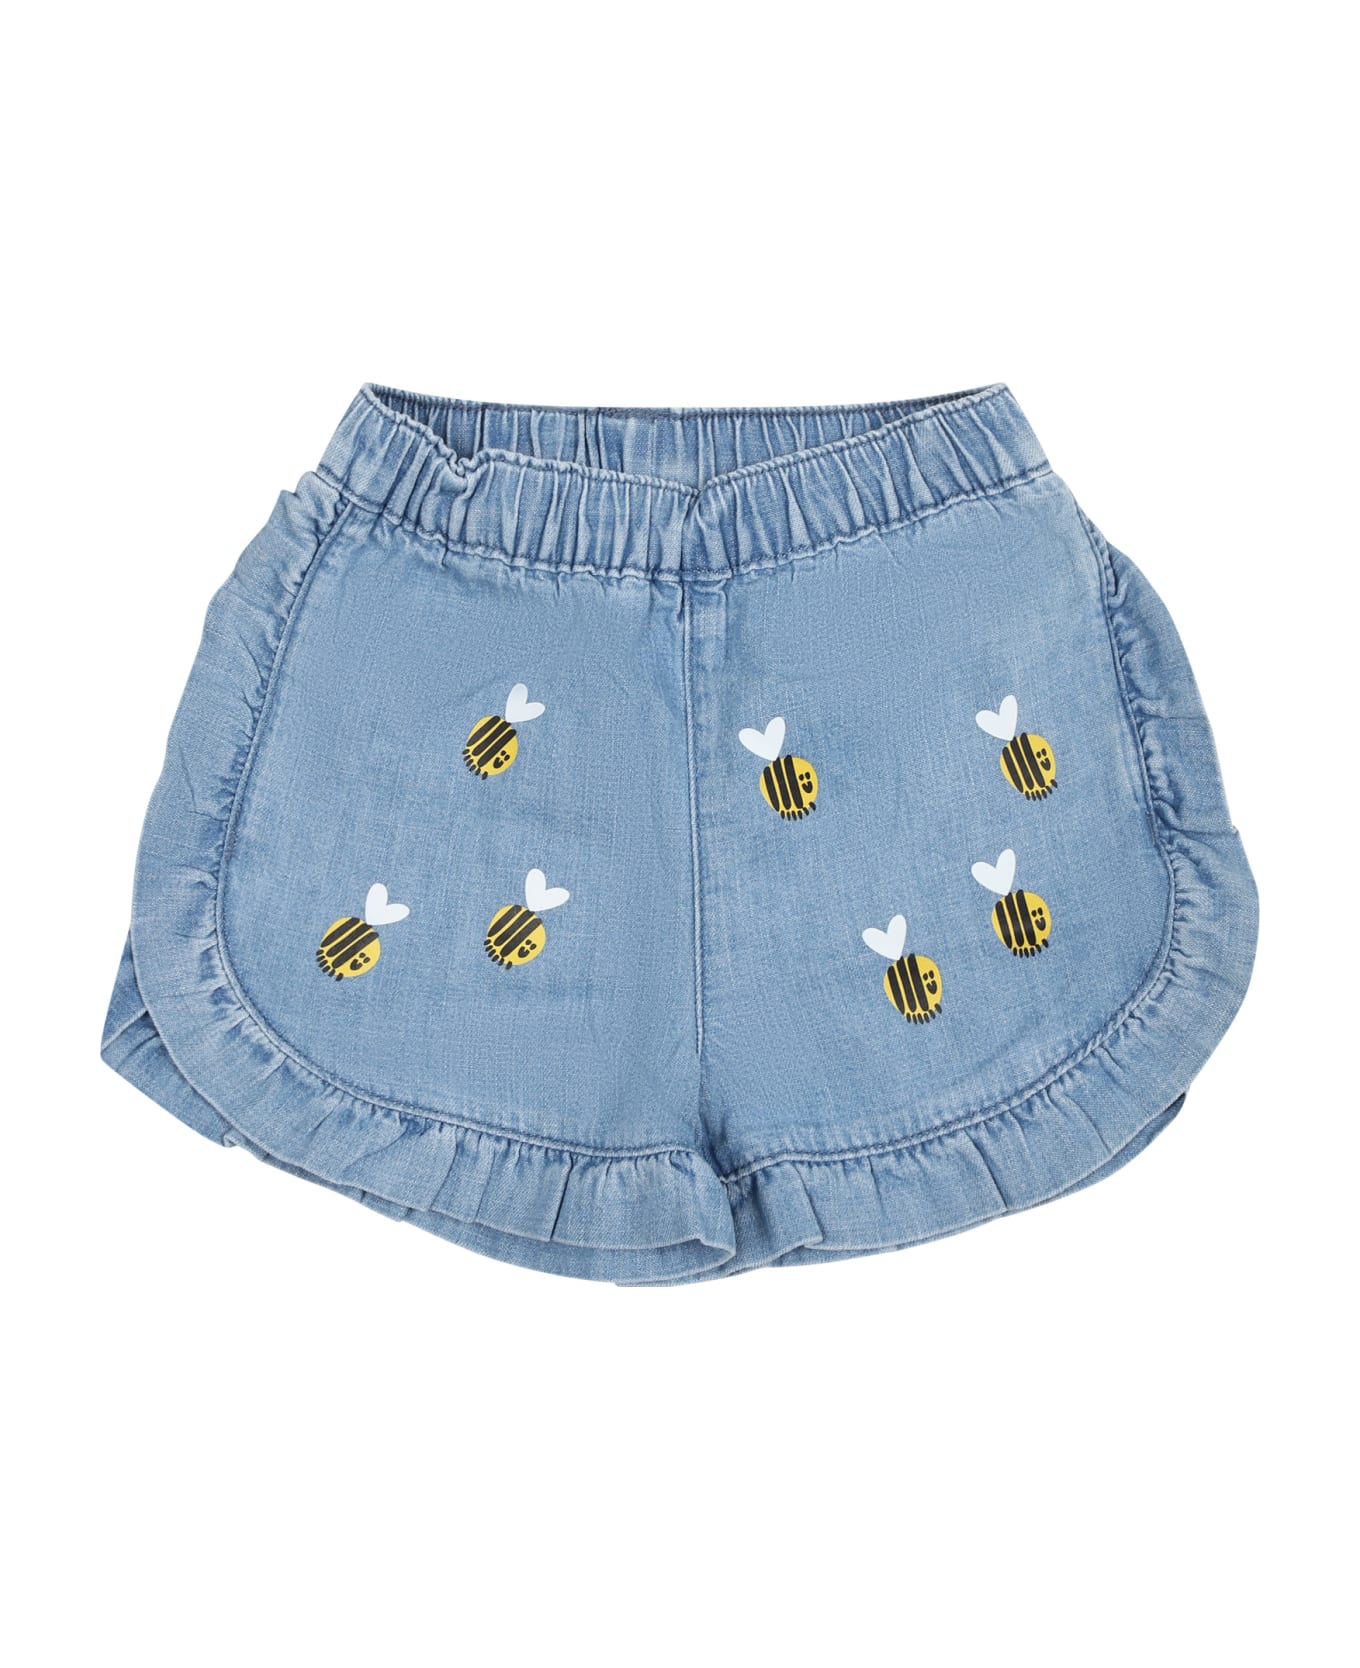 Stella McCartney Kids Blue Shorts For Baby Girl With Beees - Celeste/multicolor ボトムス